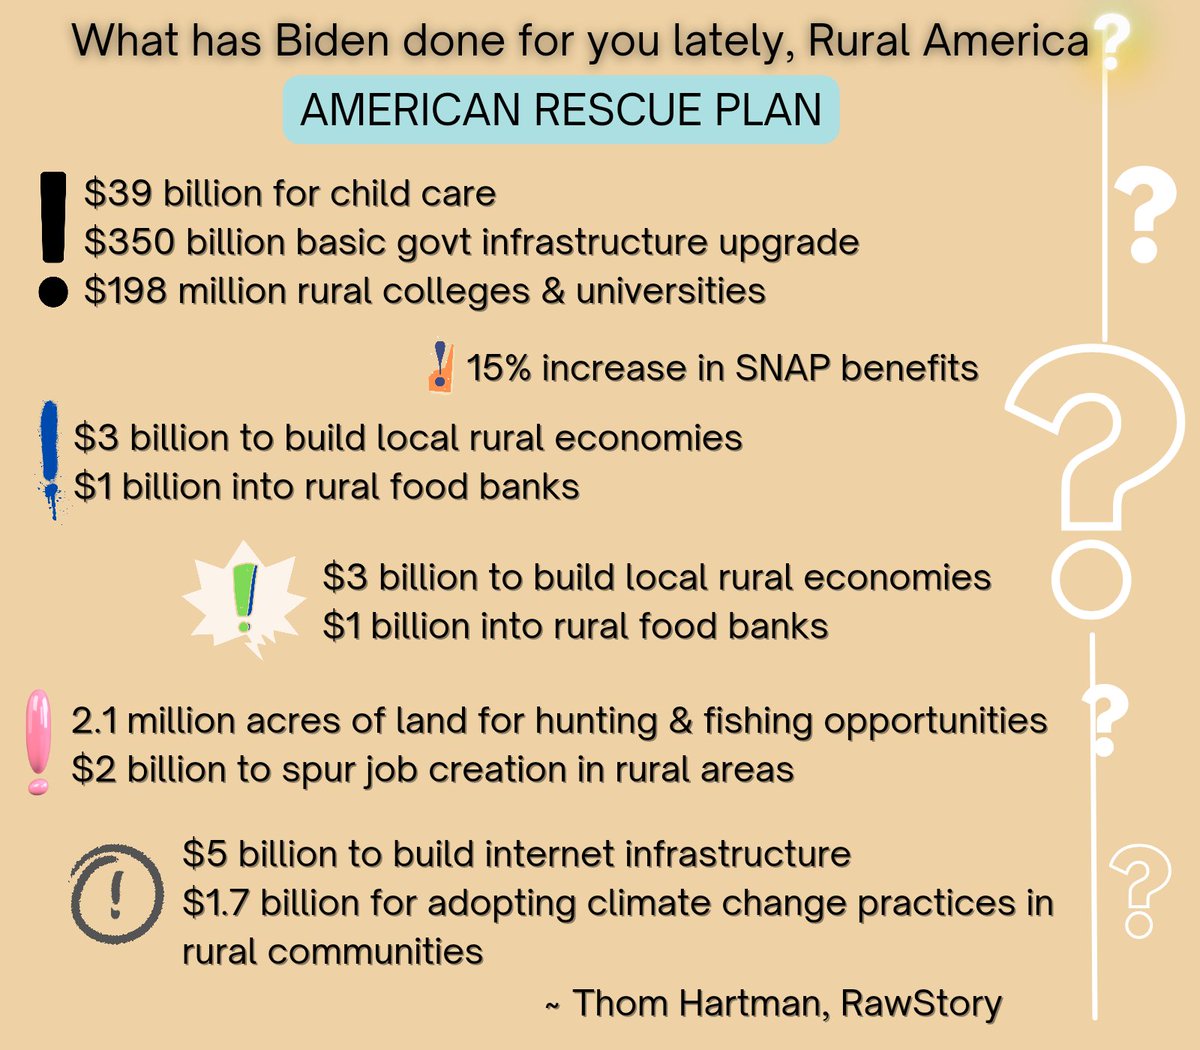 #wtpBLUE #DemVoice1 #ProudBlue #wtpGOTV24
Biden: 'Instead of exporting jobs overseas for cheaper labor, now we’re creating jobs here & expanding American products & selling them overseas, we’re not only transforming rural communities, we’re transforming our economy.”